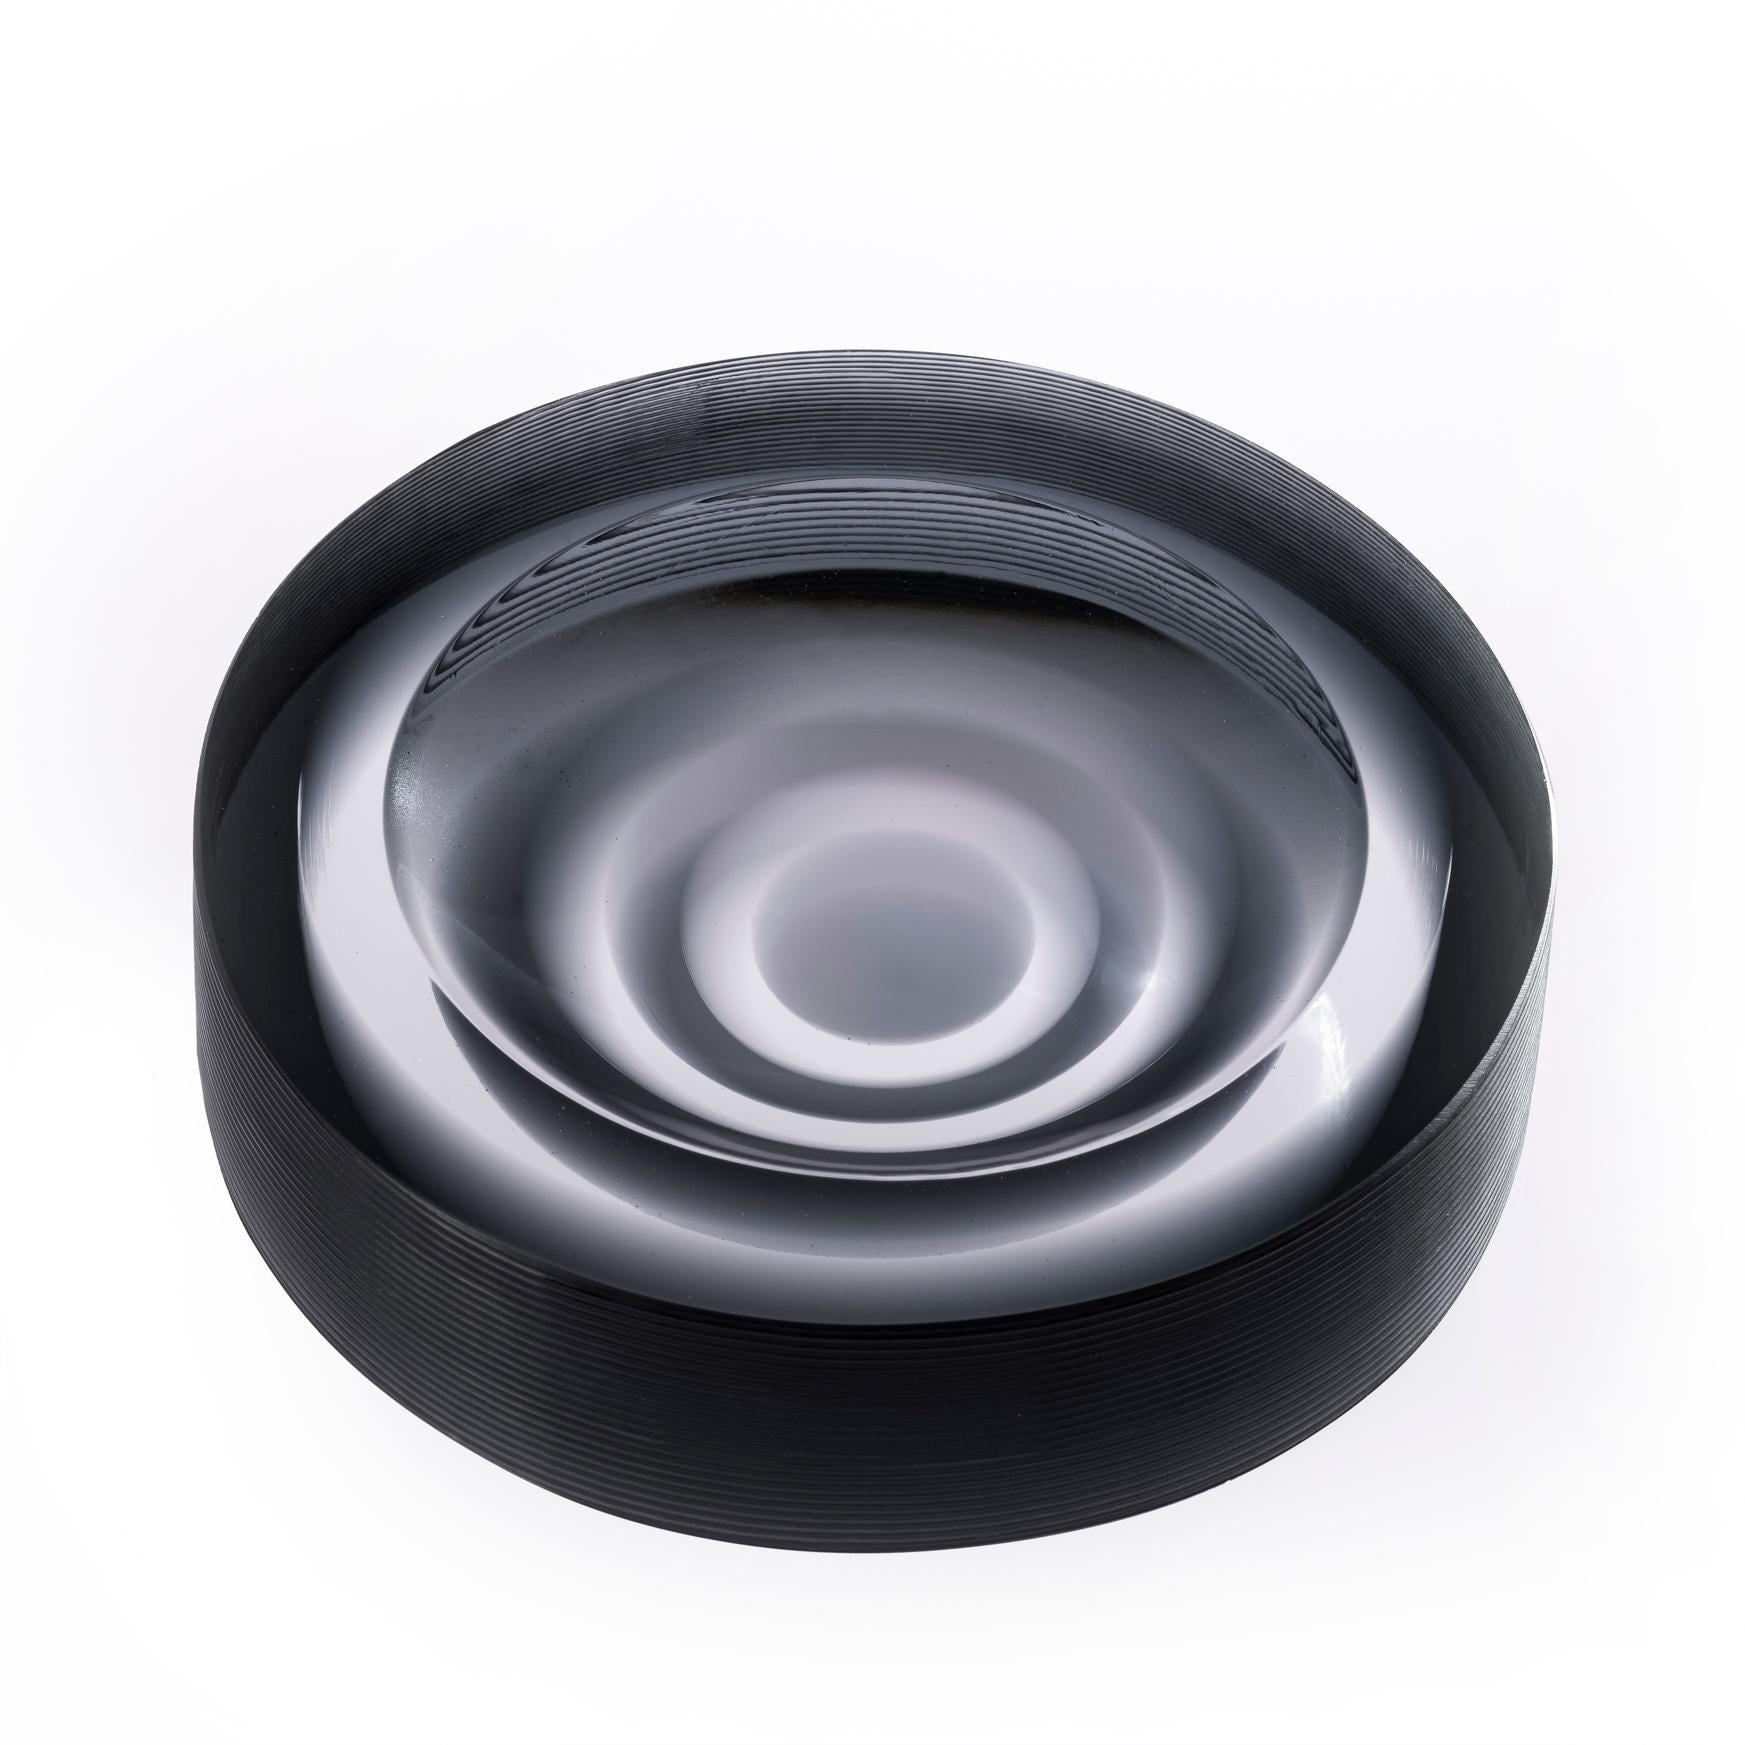 Incisioni Iridi stripe ashtray by Purho
Dimensions: D14x H3.5 cm
Materials: Glass
Other colours and dimensions are available. 

Purho is a new protagonist of made in Italy design, a work of synthesis, a research that has lasted for years, an